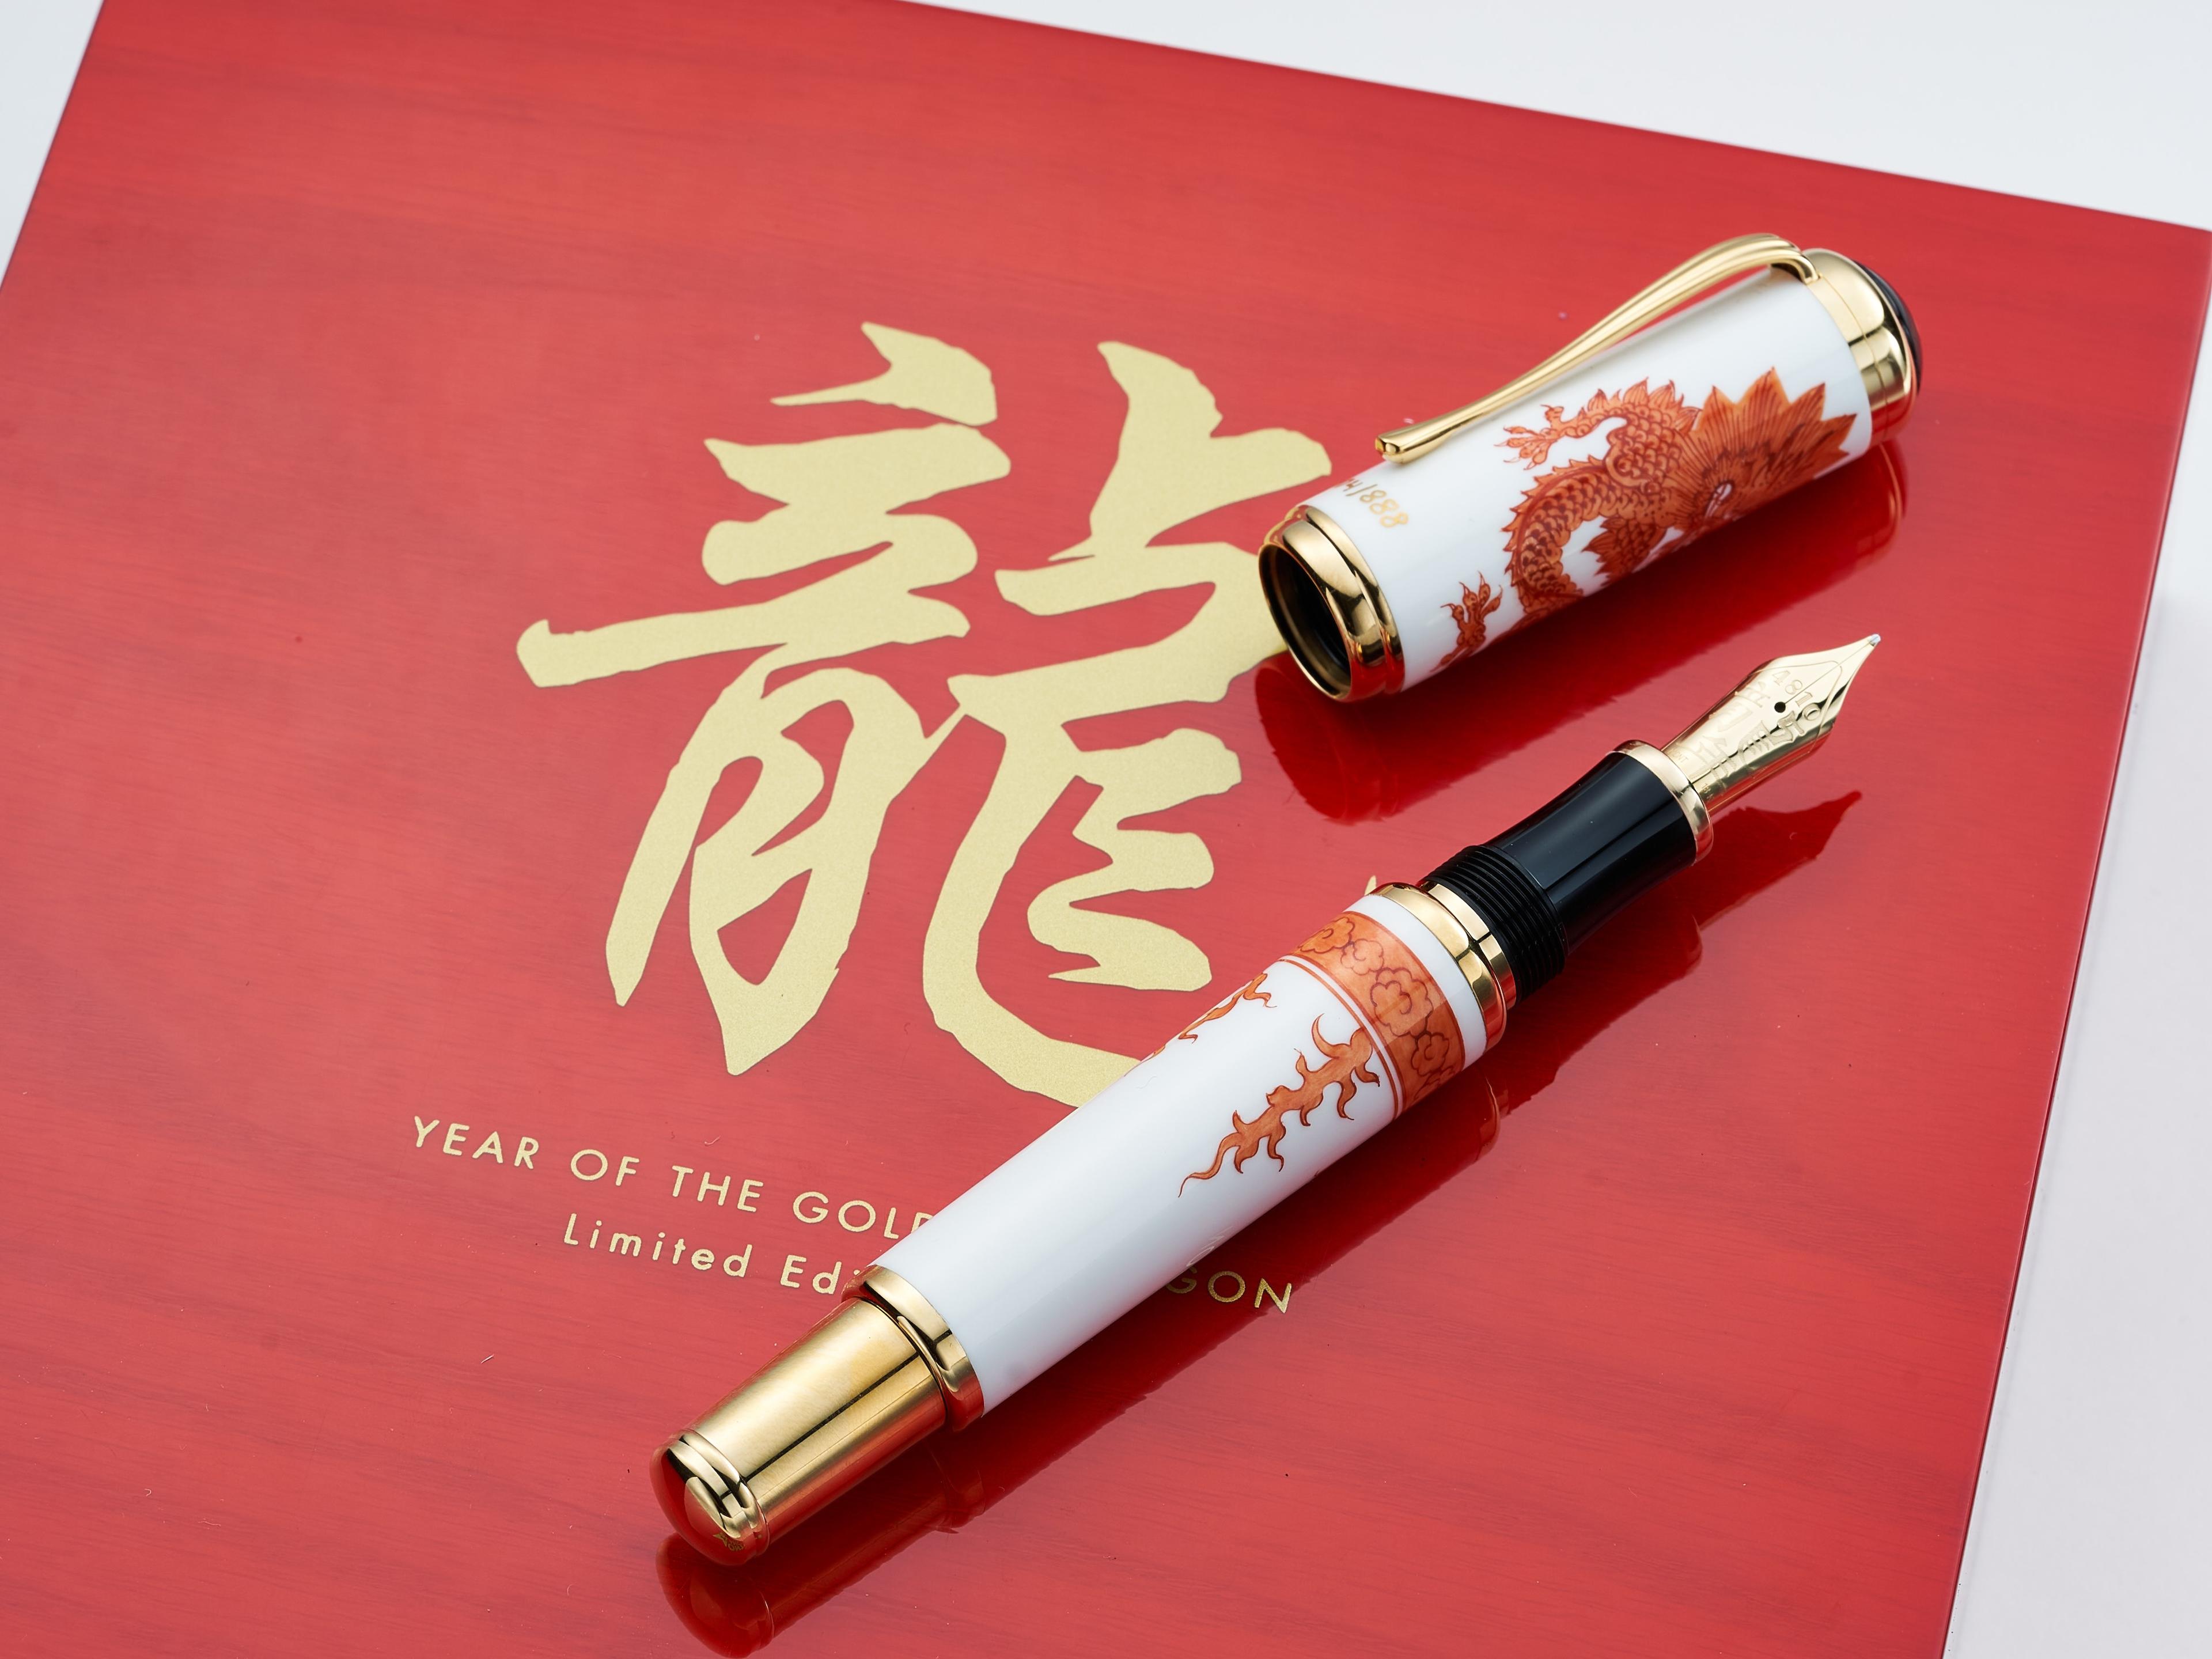 MONTBLANC | MEISSEN YEAR OF THE GOLDEN DRAGON, REF. 28666, A FINE AND RARE BRAND NEW MEISSEN PORCELAIN FOUNTAIN PEN